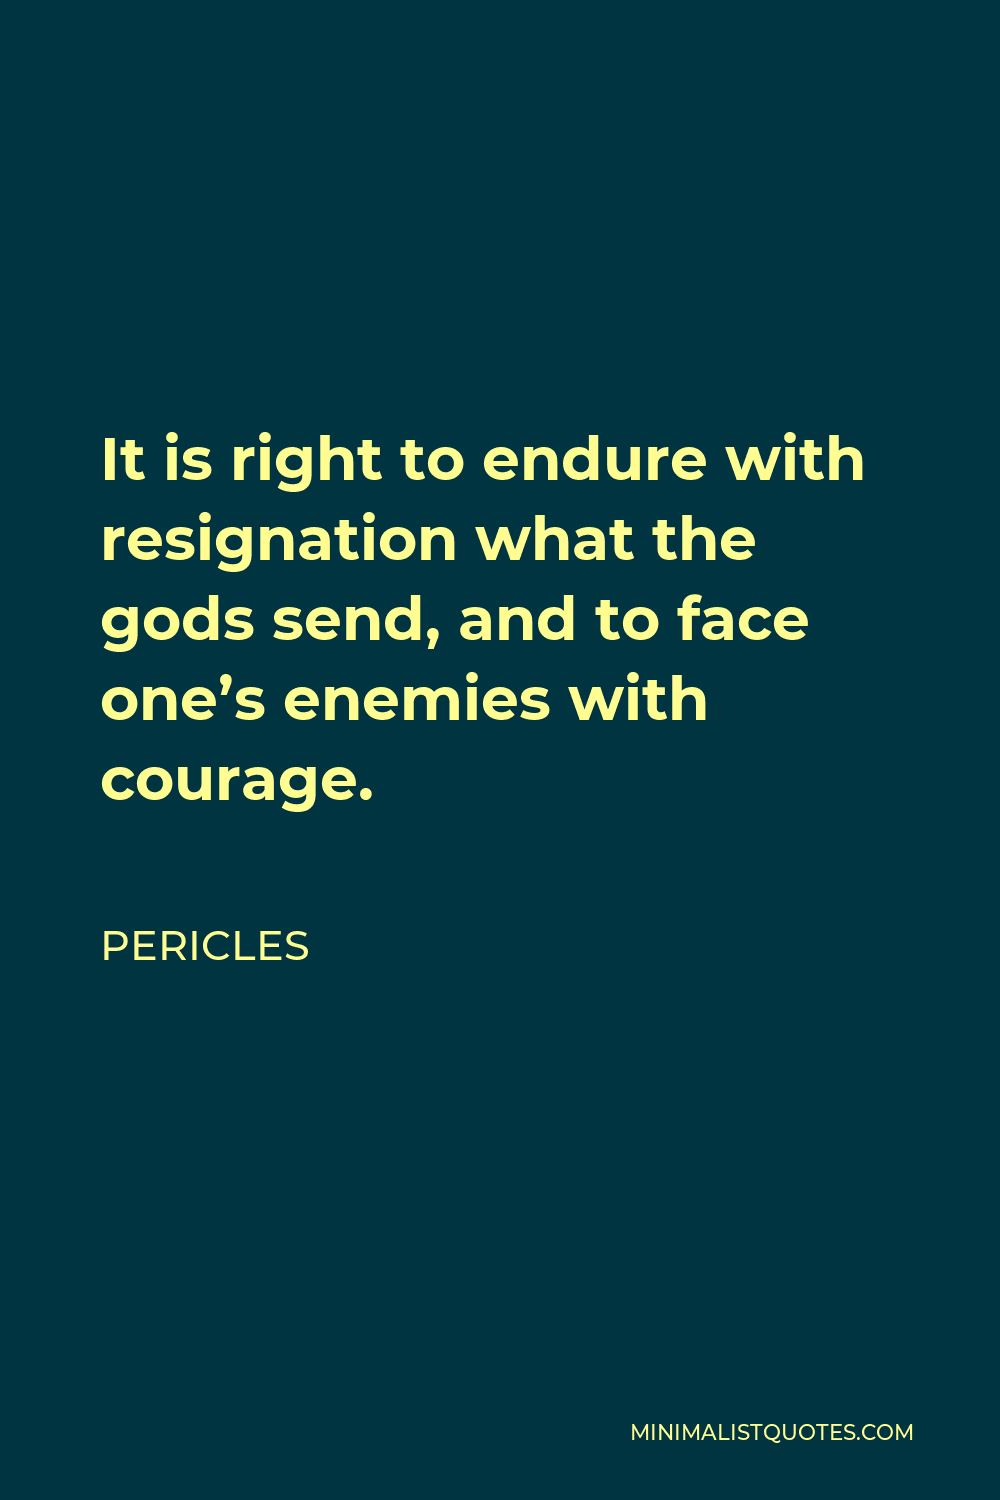 Pericles Quote - It is right to endure with resignation what the gods send, and to face one’s enemies with courage.